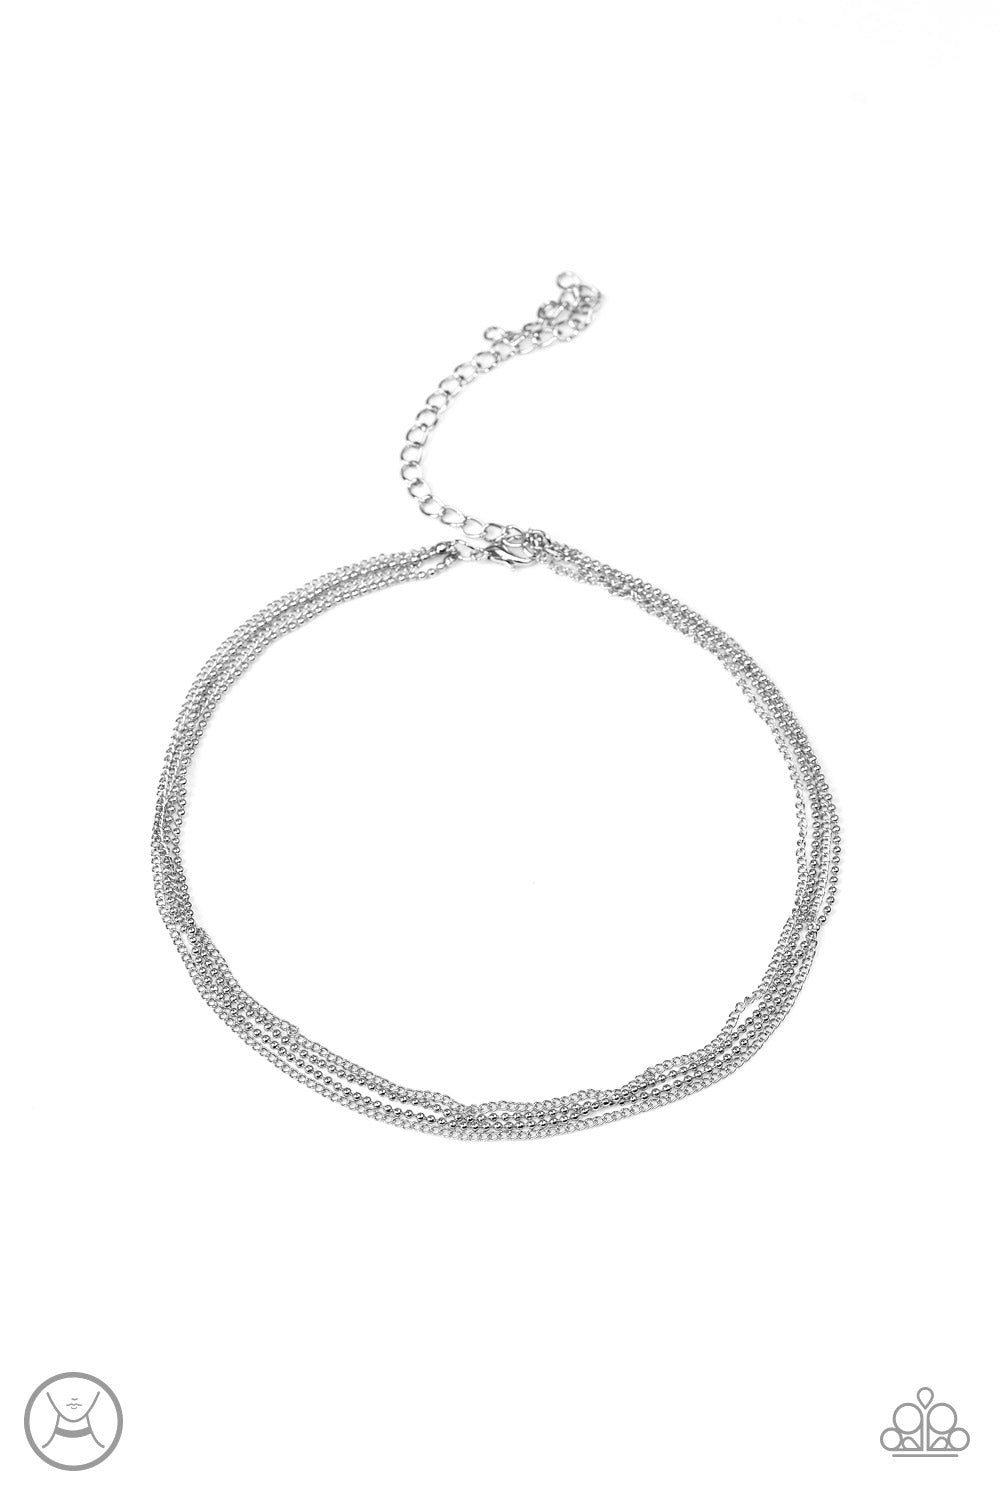 If You Dare - Silver Choker Fashion Necklace - Paparazzi Jewelry  - Bejeweled Accessories By Kristie - Mismatched silver chains layer around the neck in a daring fashion. Features an adjustable clasp closure. Sold as one individual choker necklace.